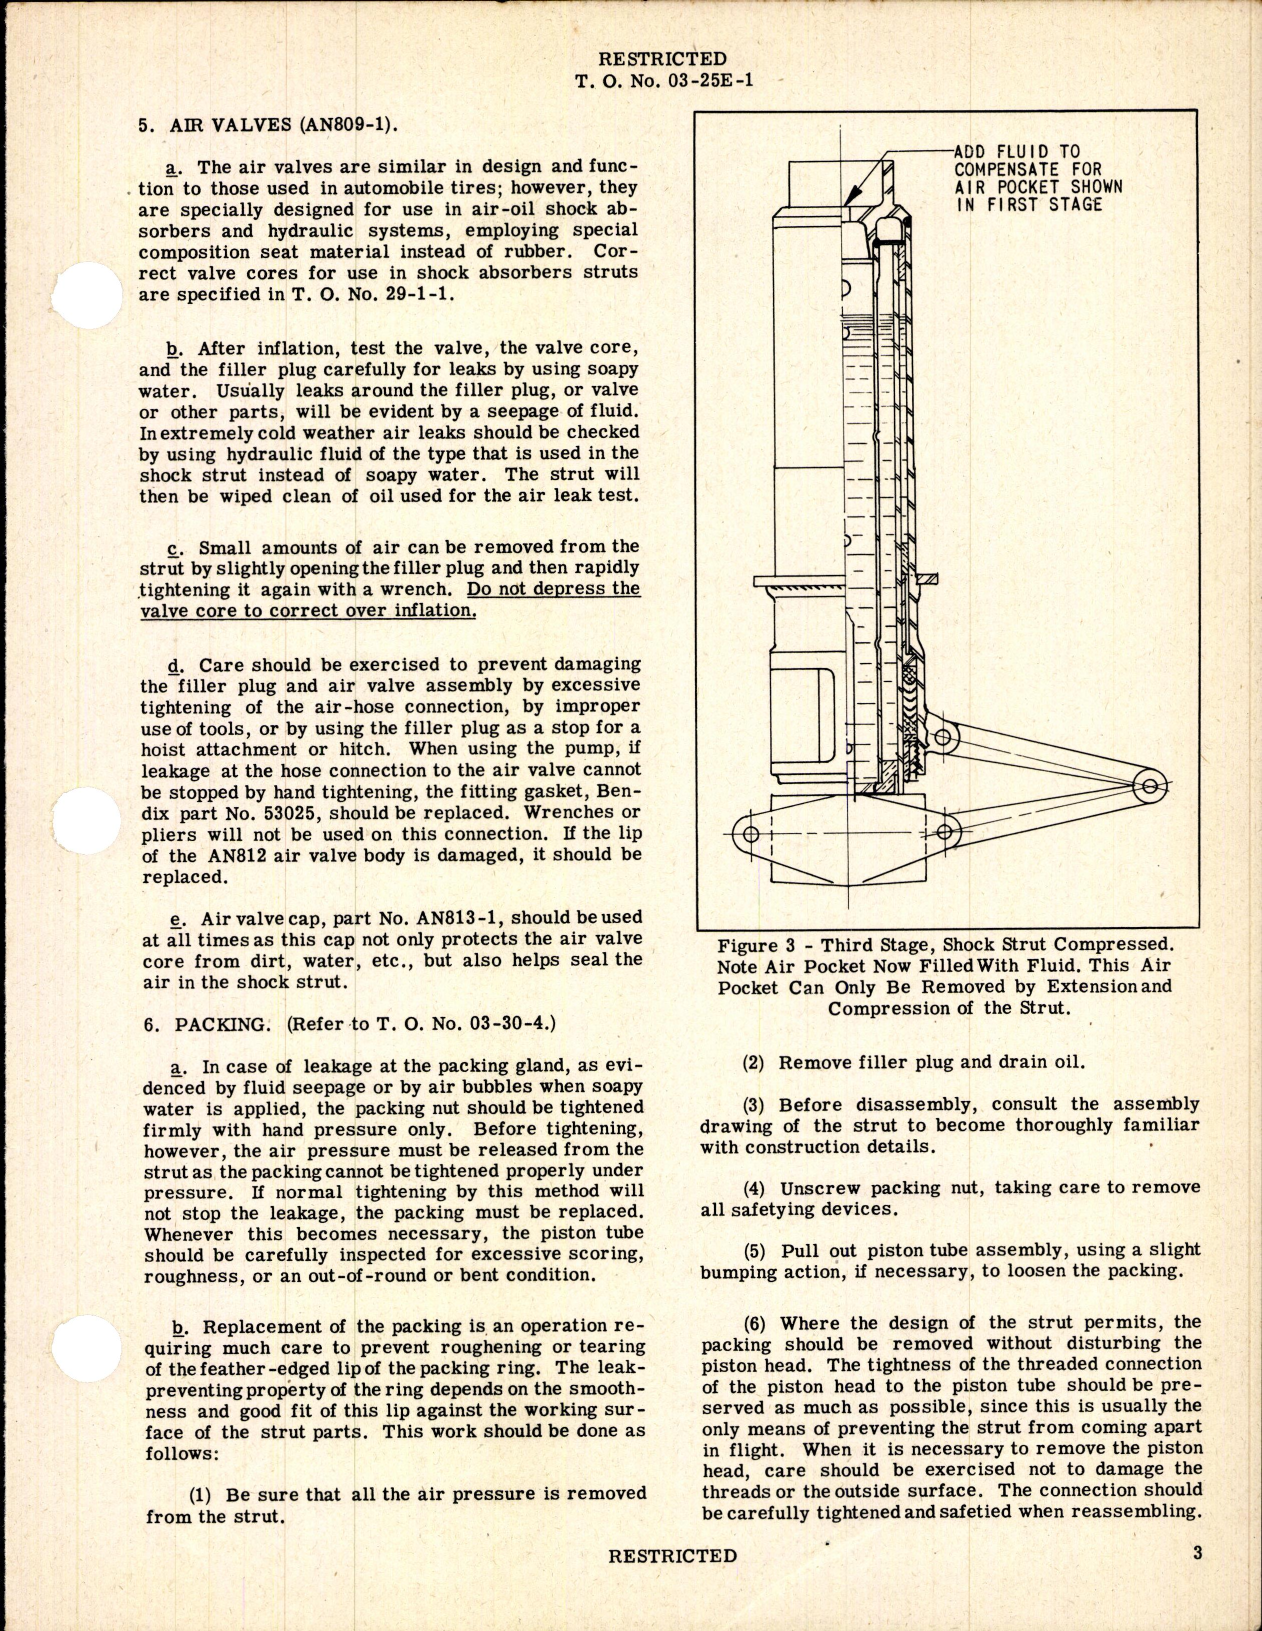 Sample page 3 from AirCorps Library document: Shock Struts - Air-Oil Shock Absorber Struts